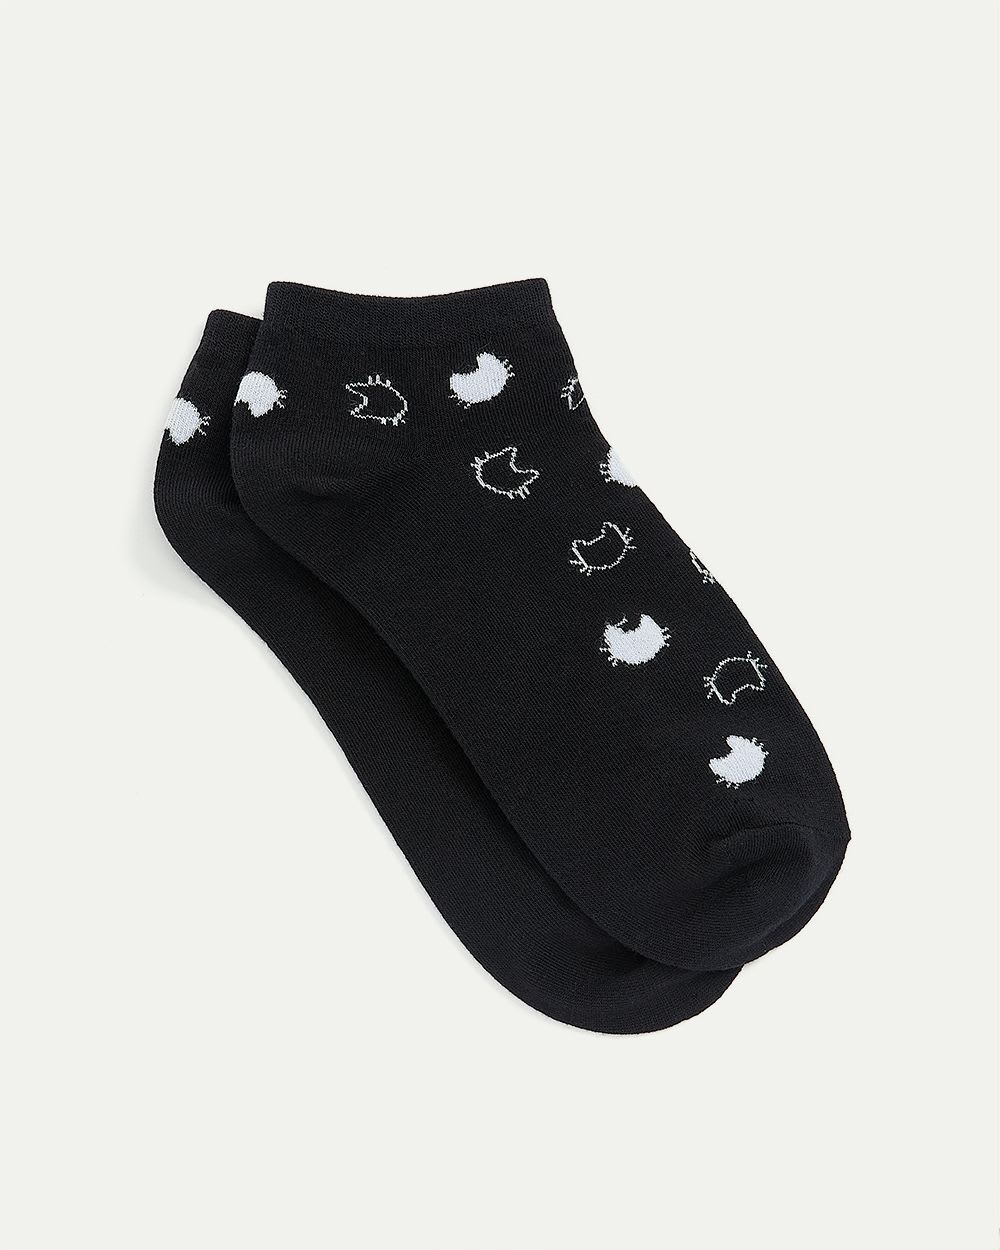 Cotton Anklet Socks with Cats